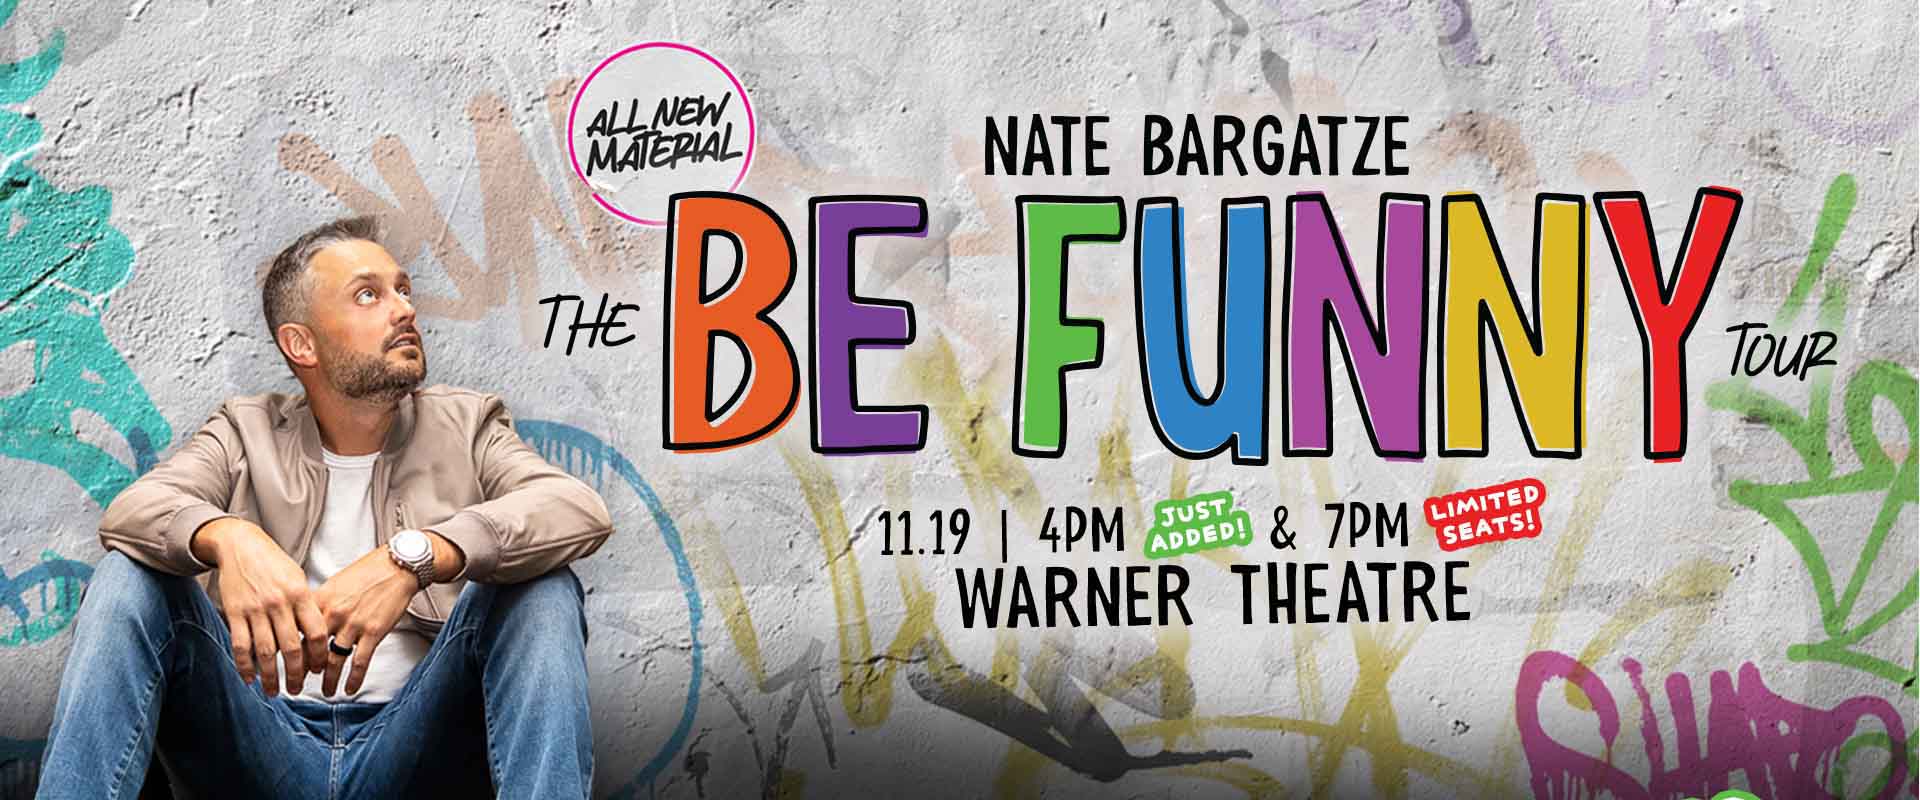 Nate Bargatze The Be Funny Tour!